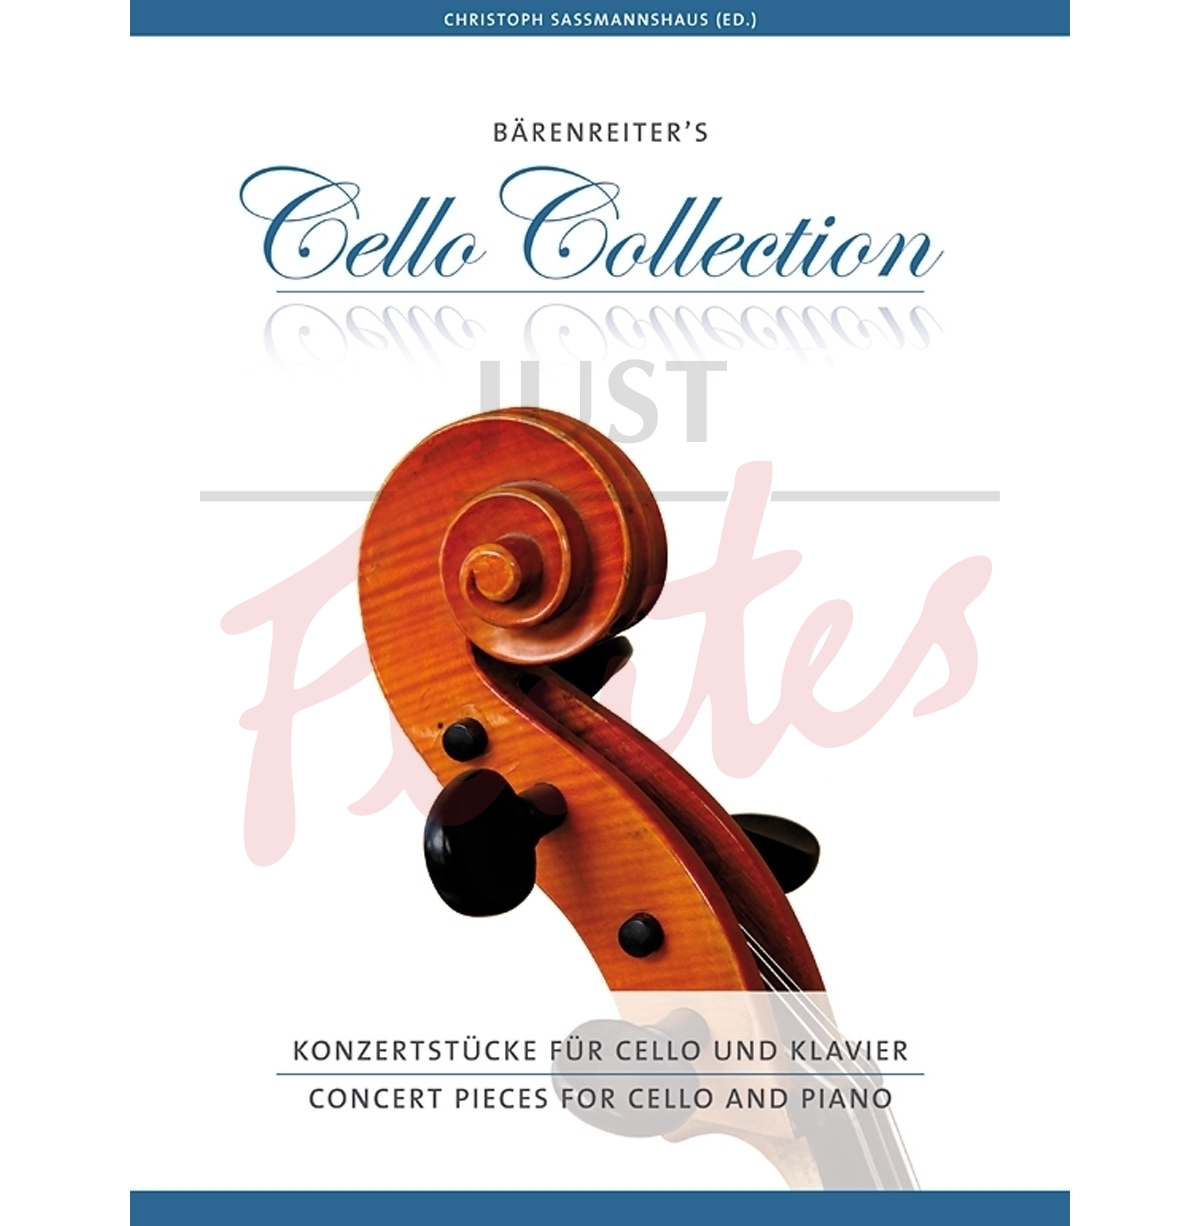 Concert Pieces for Cello and Piano